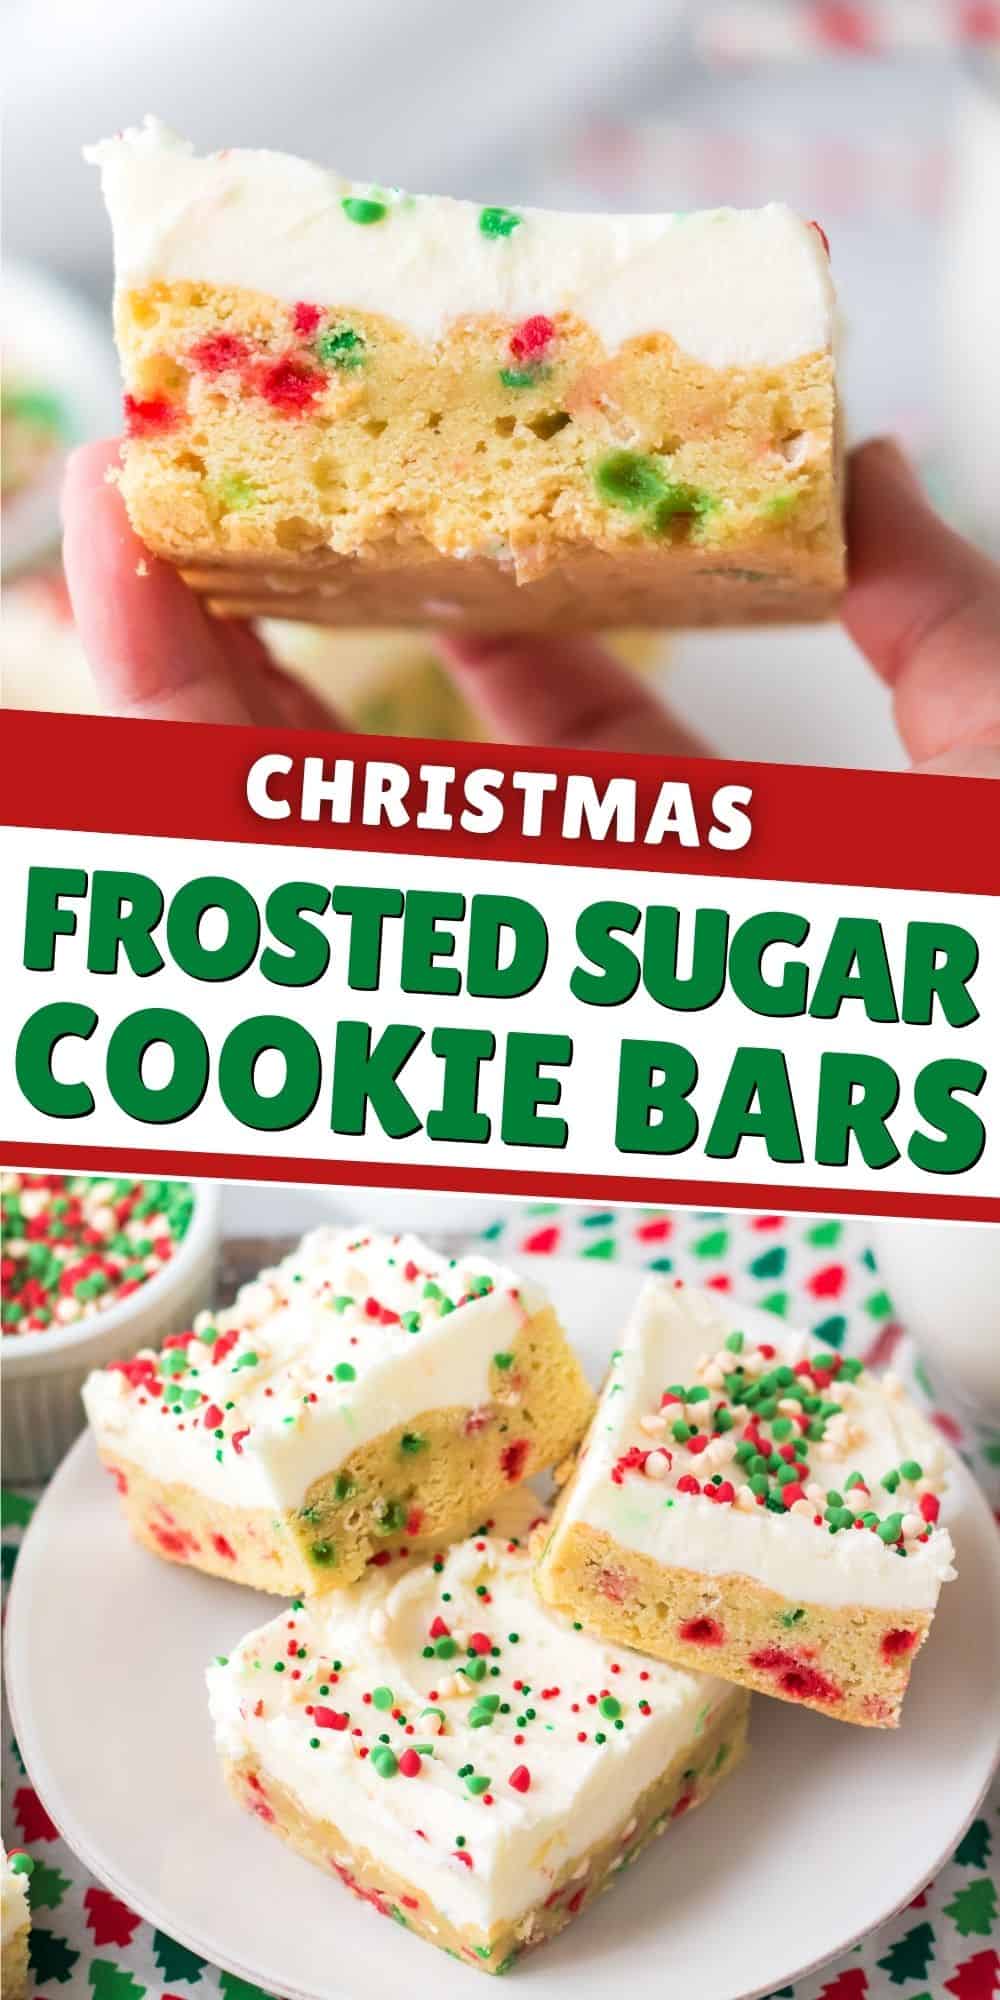 Christmas Frosted Sugar Cookie Bars Pin.